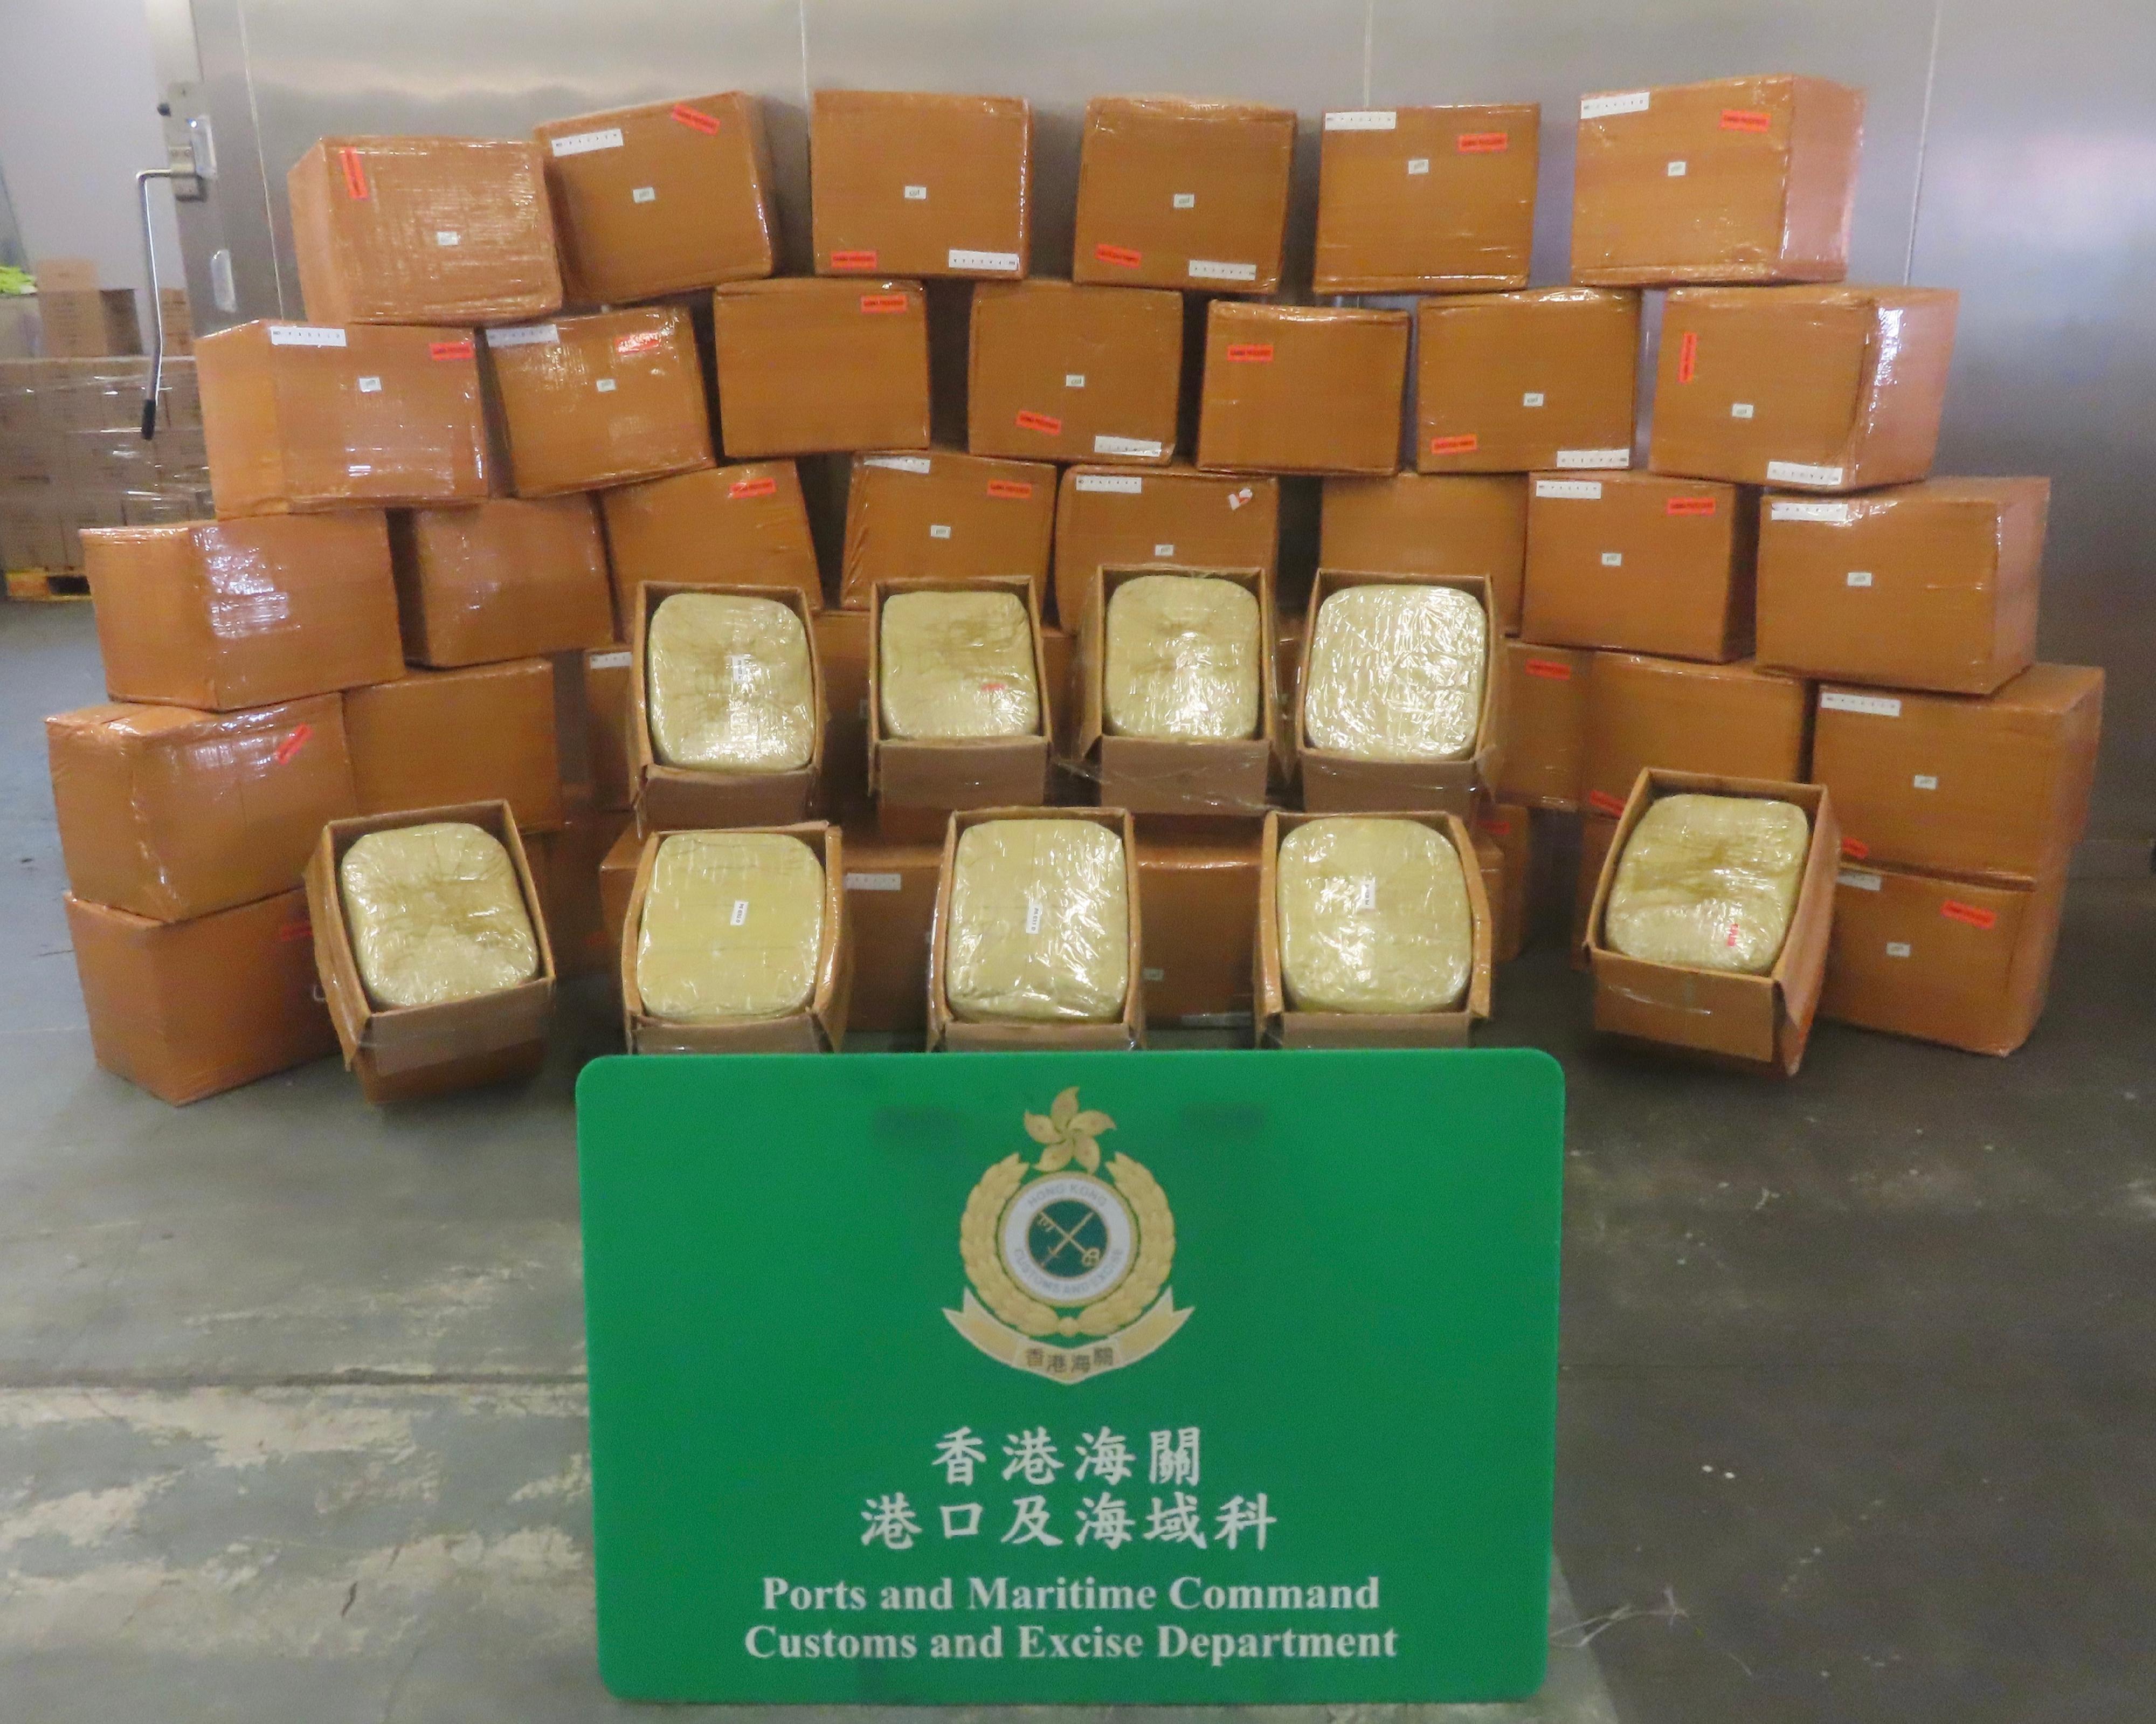 Hong Kong Customs on March 8 and yesterday (March 14) seized a total of about 52 tonnes of suspected mitragynine with an estimated market value of about $138 million at the Kwai Chung Customhouse Cargo Examination Compound. Photo shows some of the suspected mitragynine seized by Customs officers on March 8.